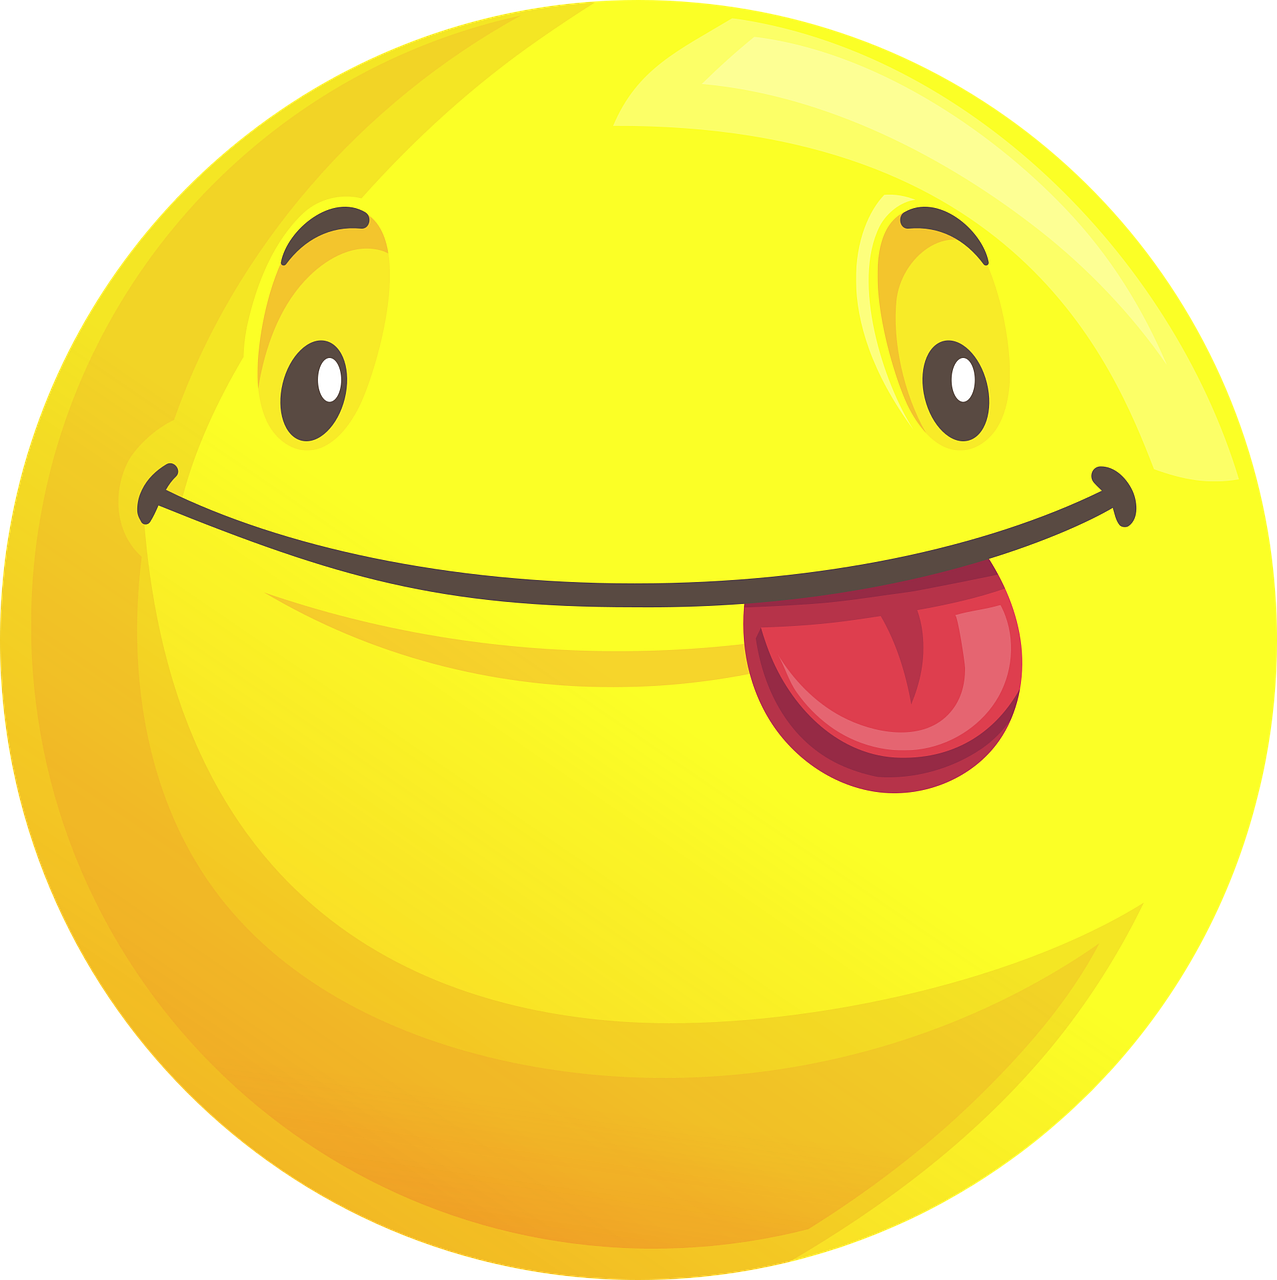 a yellow smiley face with a red tongue, vector art, by Aleksander Gierymski, mingei, round chin, awesome, grinning lasciviously, ball